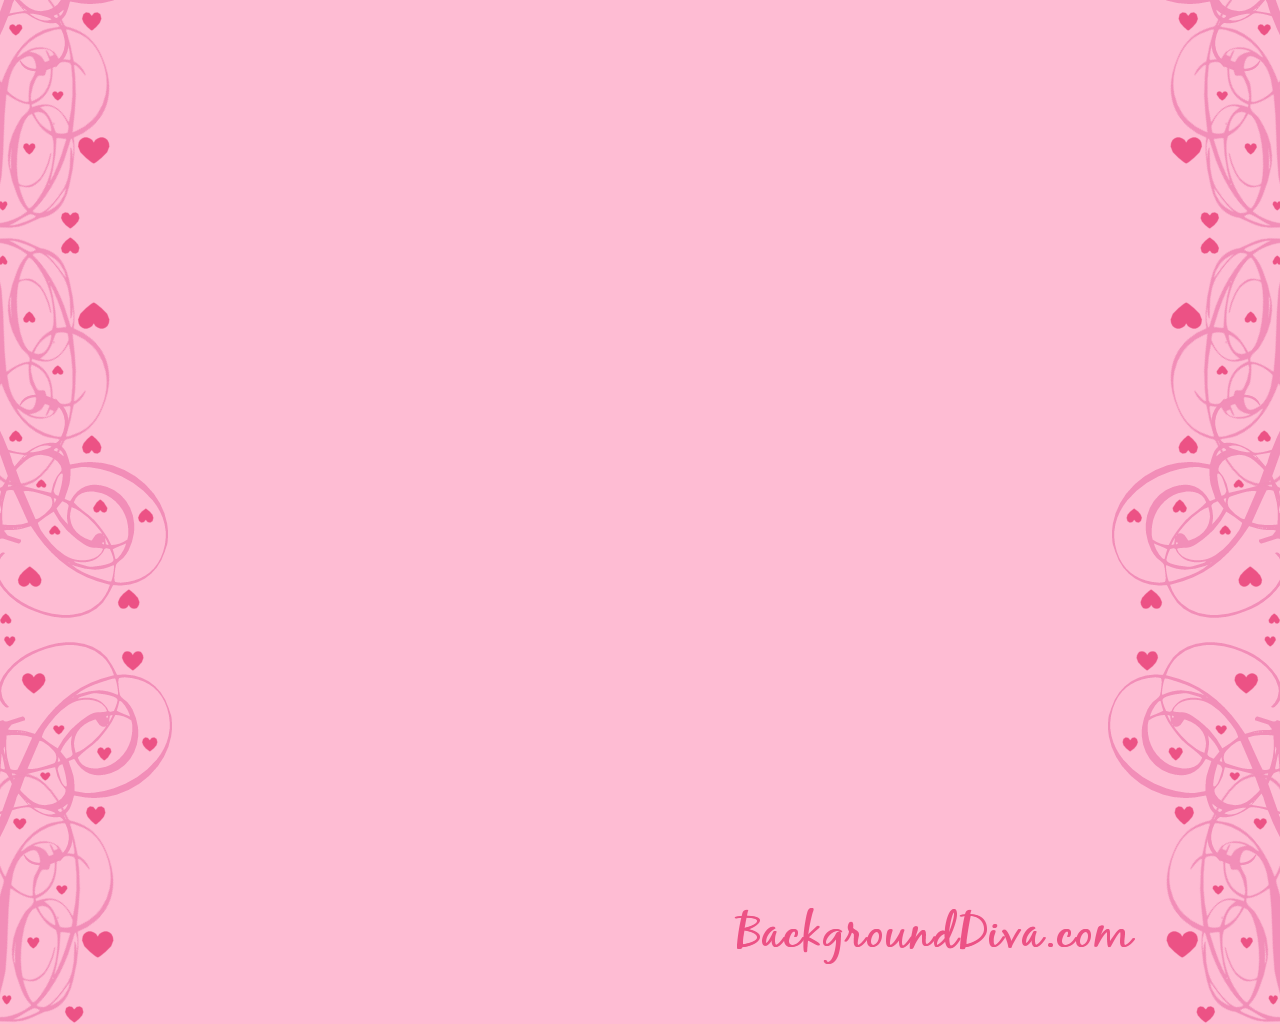 Love Pink Background 115928 High Definition Wallpaper. Suwall